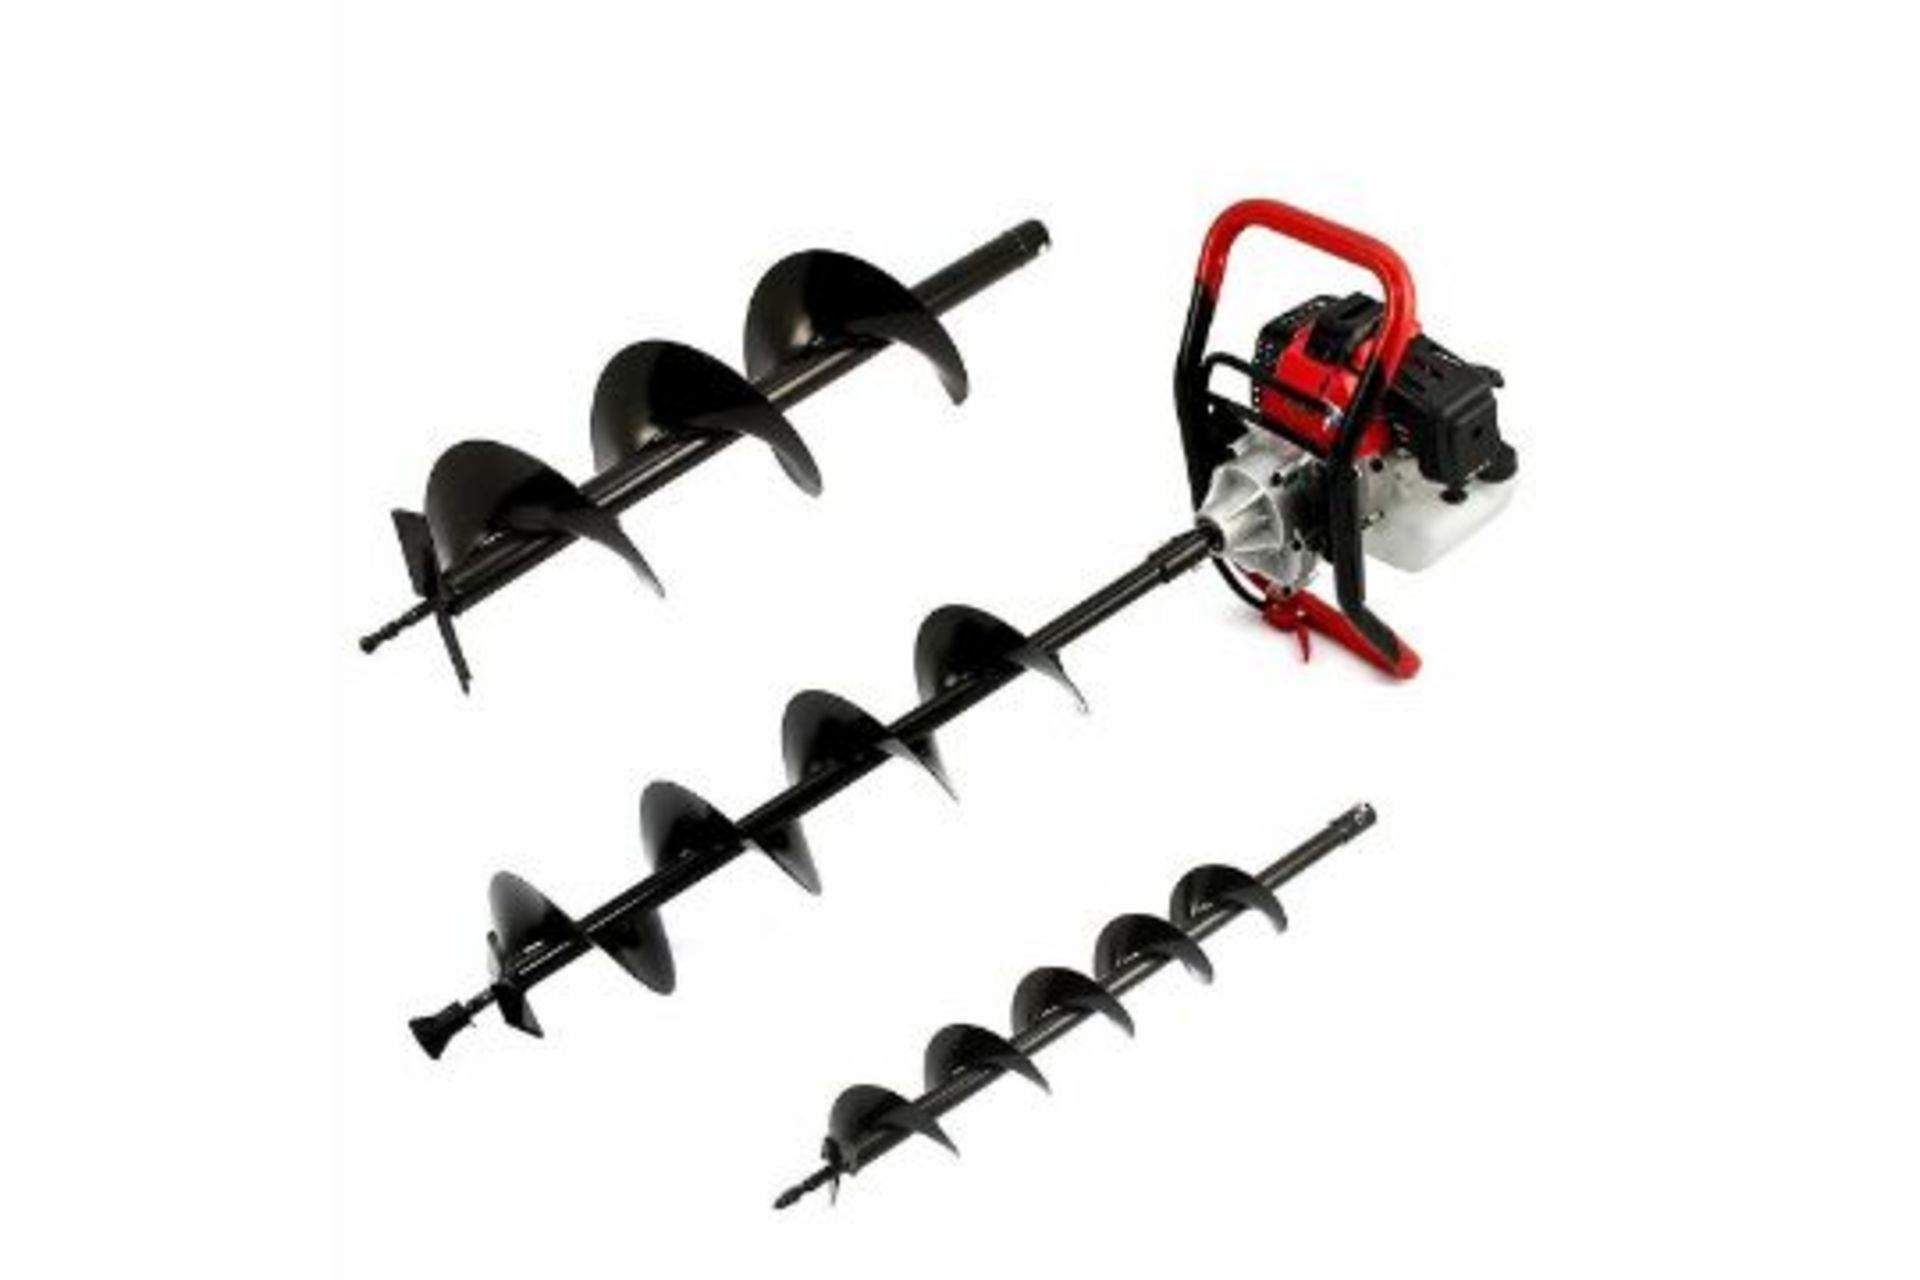 1 x High Performance 65cc Petrol Earth Auger and Fence Post Hole Borer - Brand New Boxed Stock - - Image 3 of 5